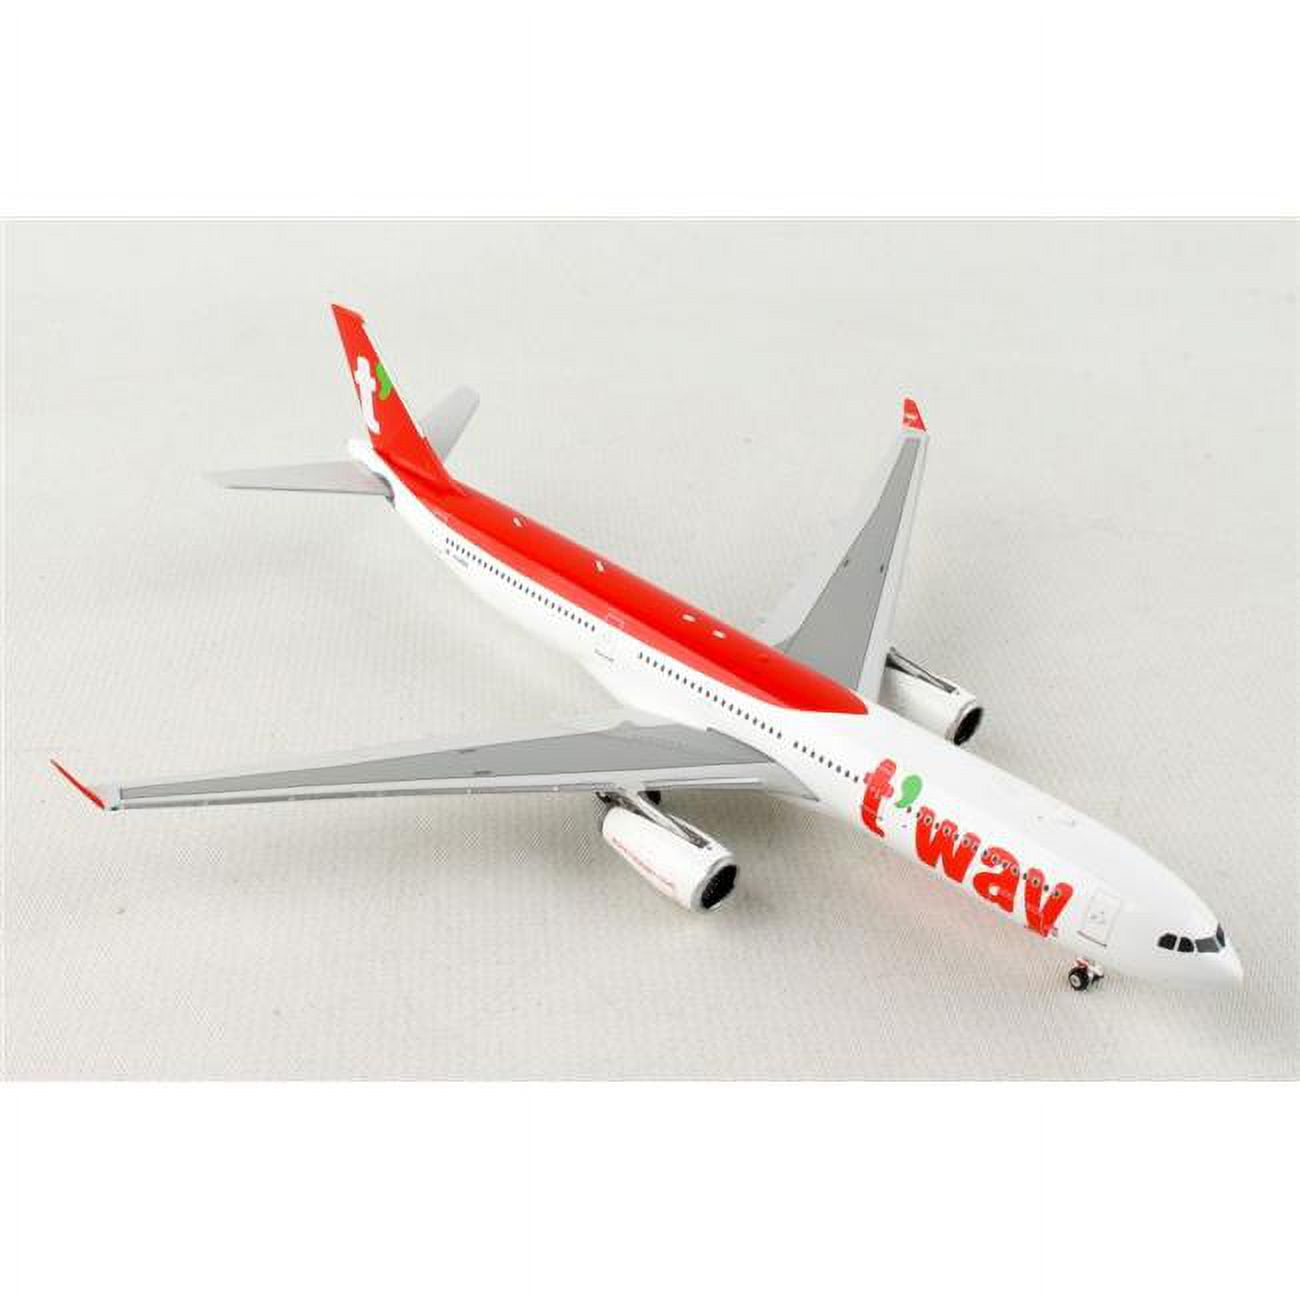 Picture of Phoenix PH2258 1-400 Scale Registration No.HL8501 Phoenix TWay Air A330-300 Model Aircraft Toy